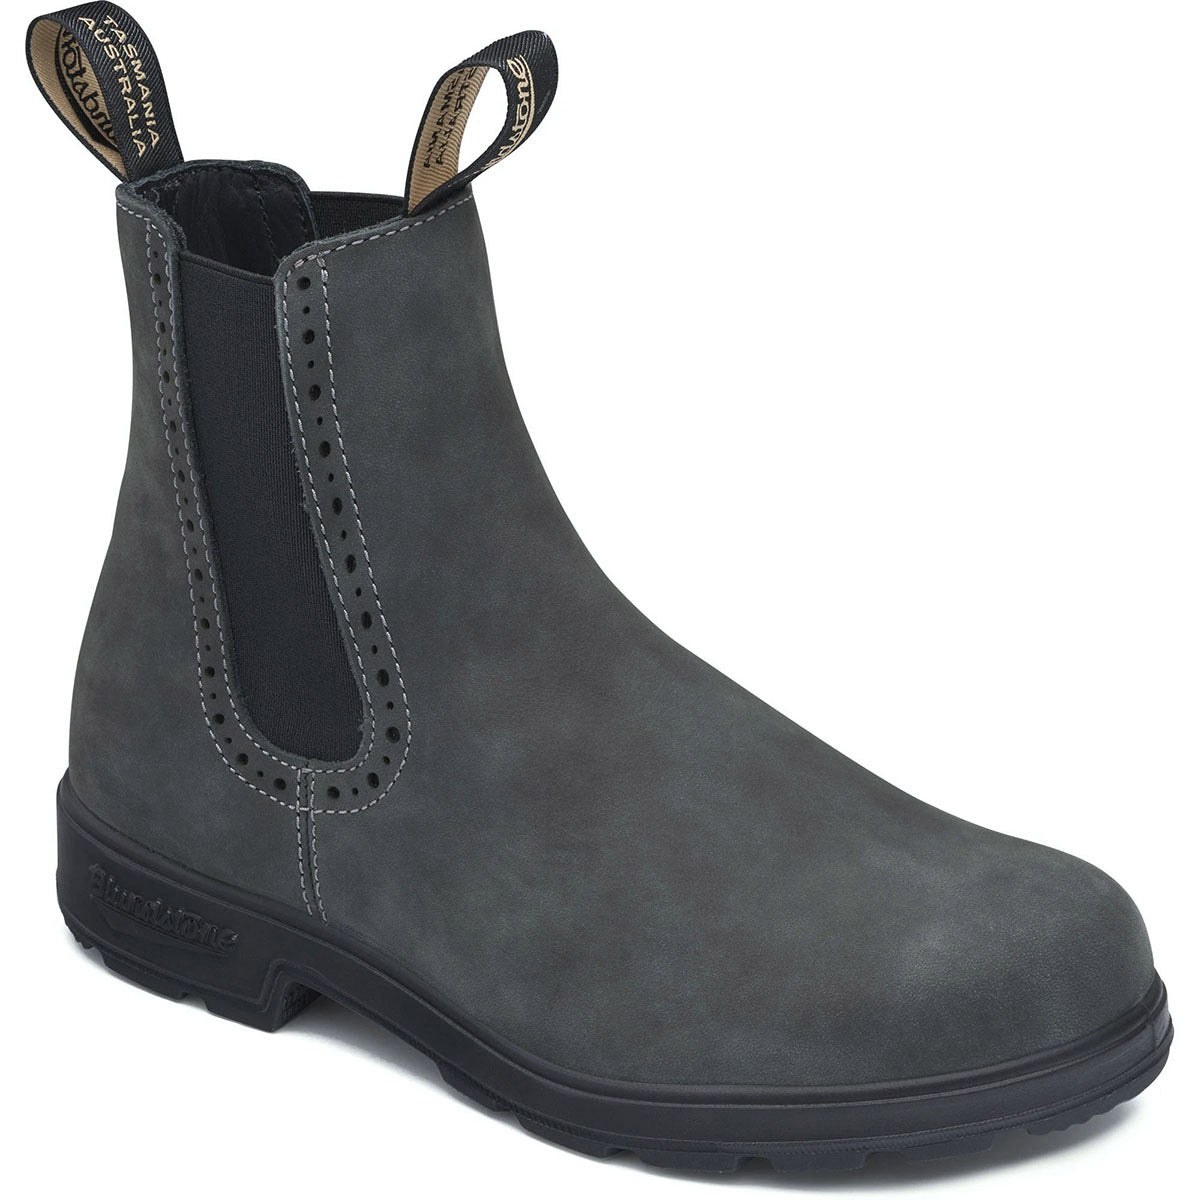 A rustic black single Blundstone 1630 High Top Chelsea boot with elastic side panels and pull-on tabs.